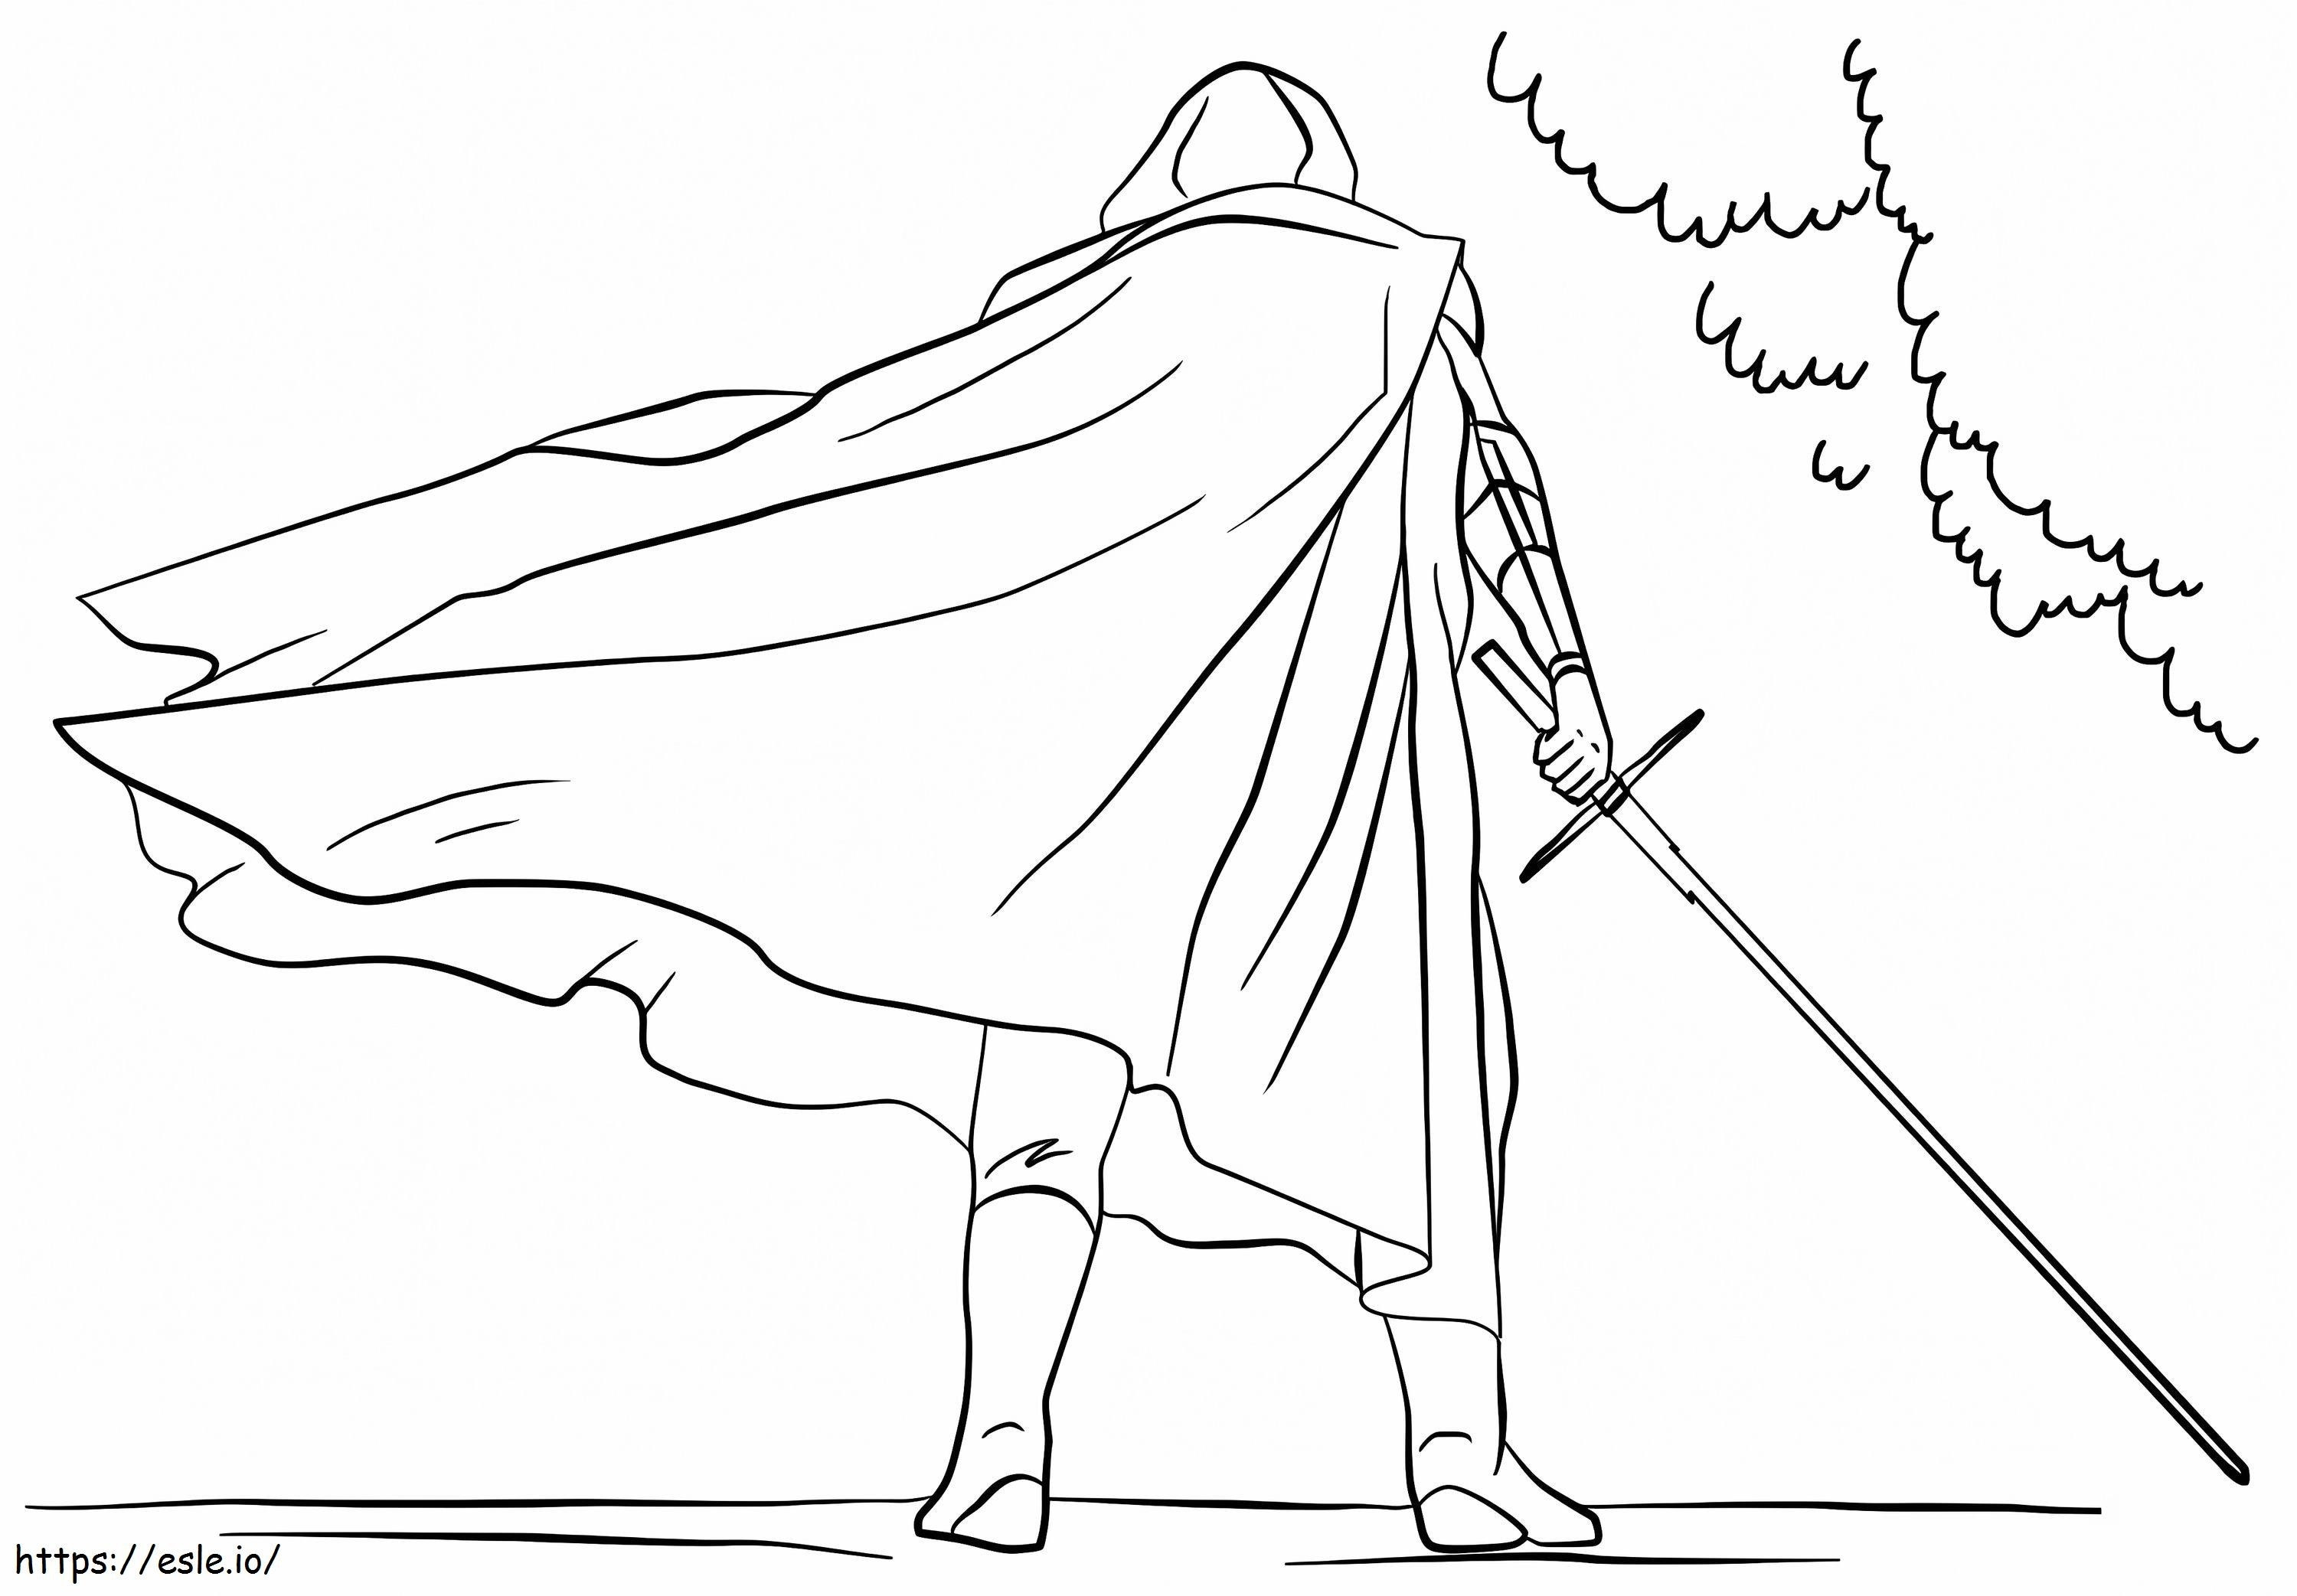 Awesome Kylo Ren coloring page